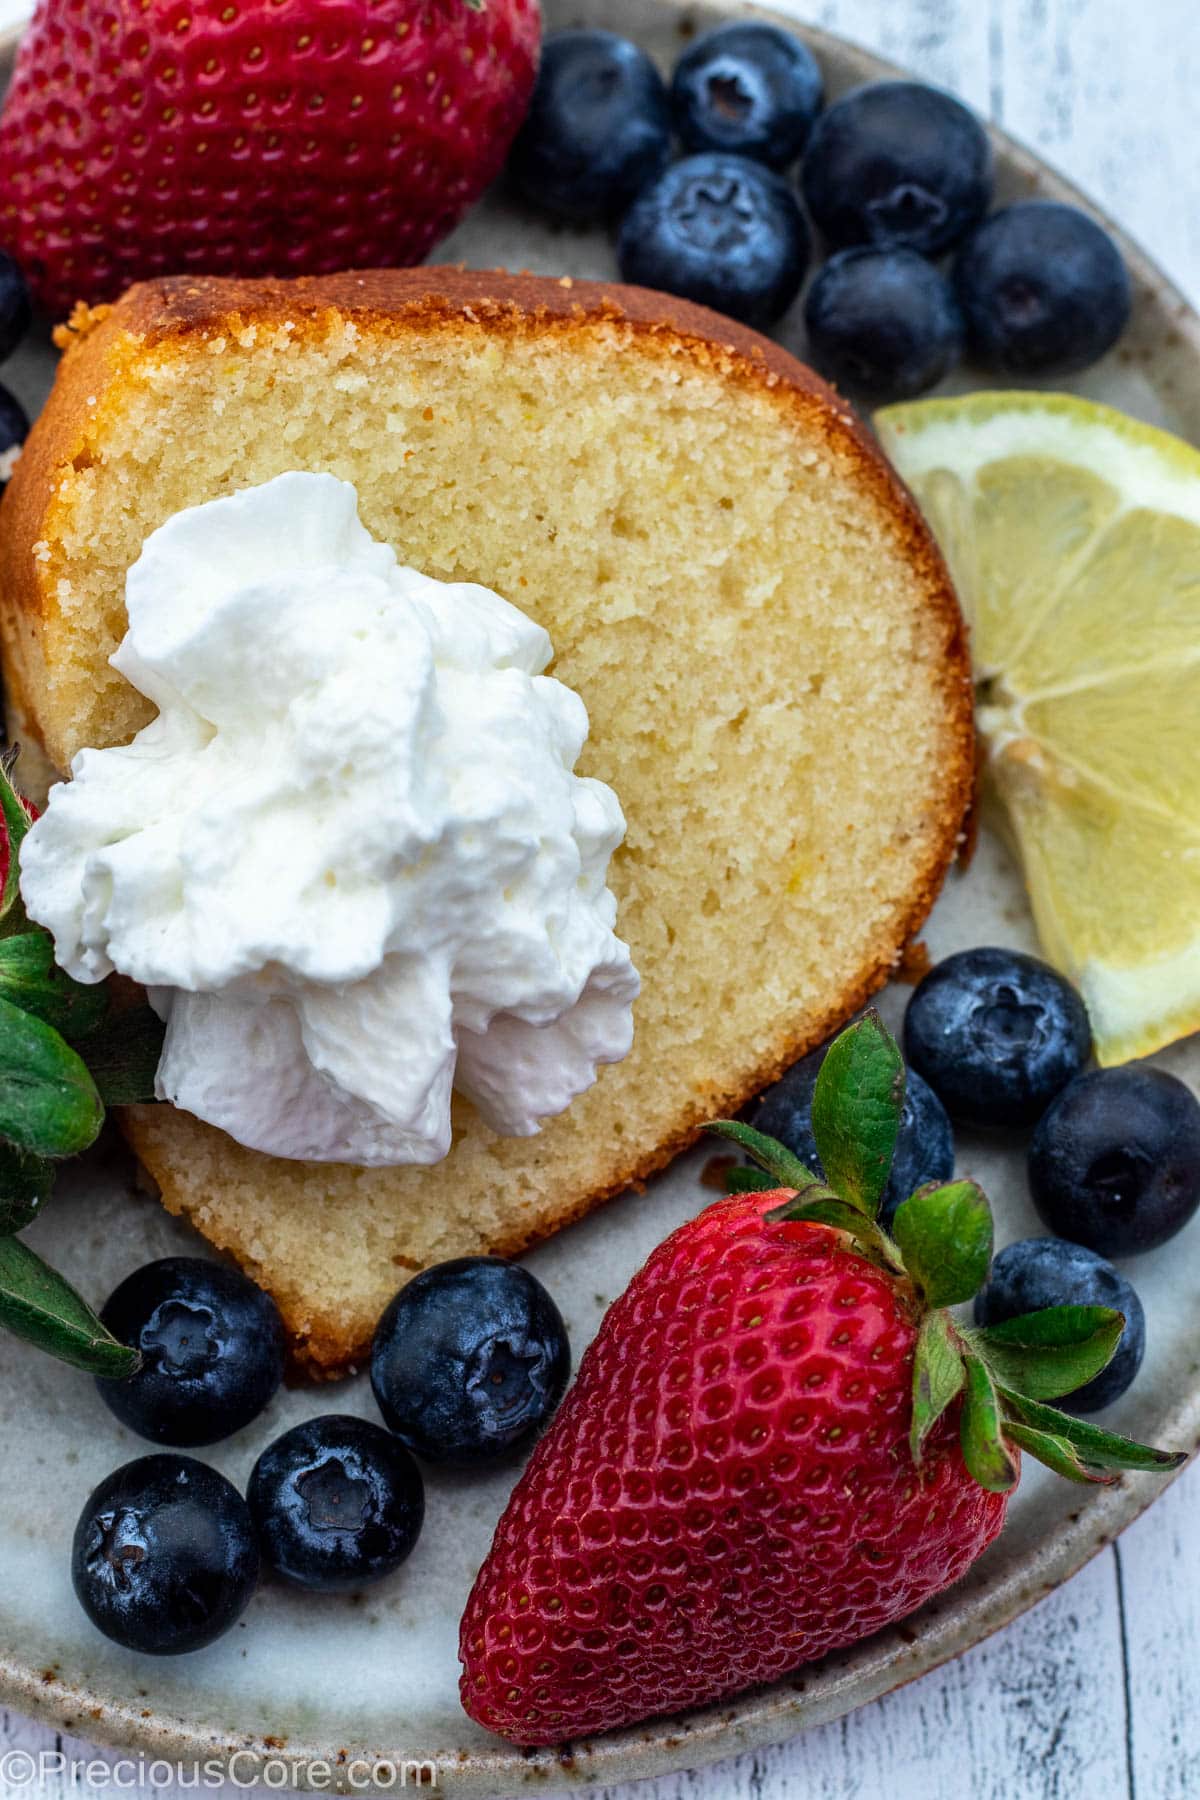 A slice of lemon pound cake on a plate, topped with whipped cream and surrounded by berries.